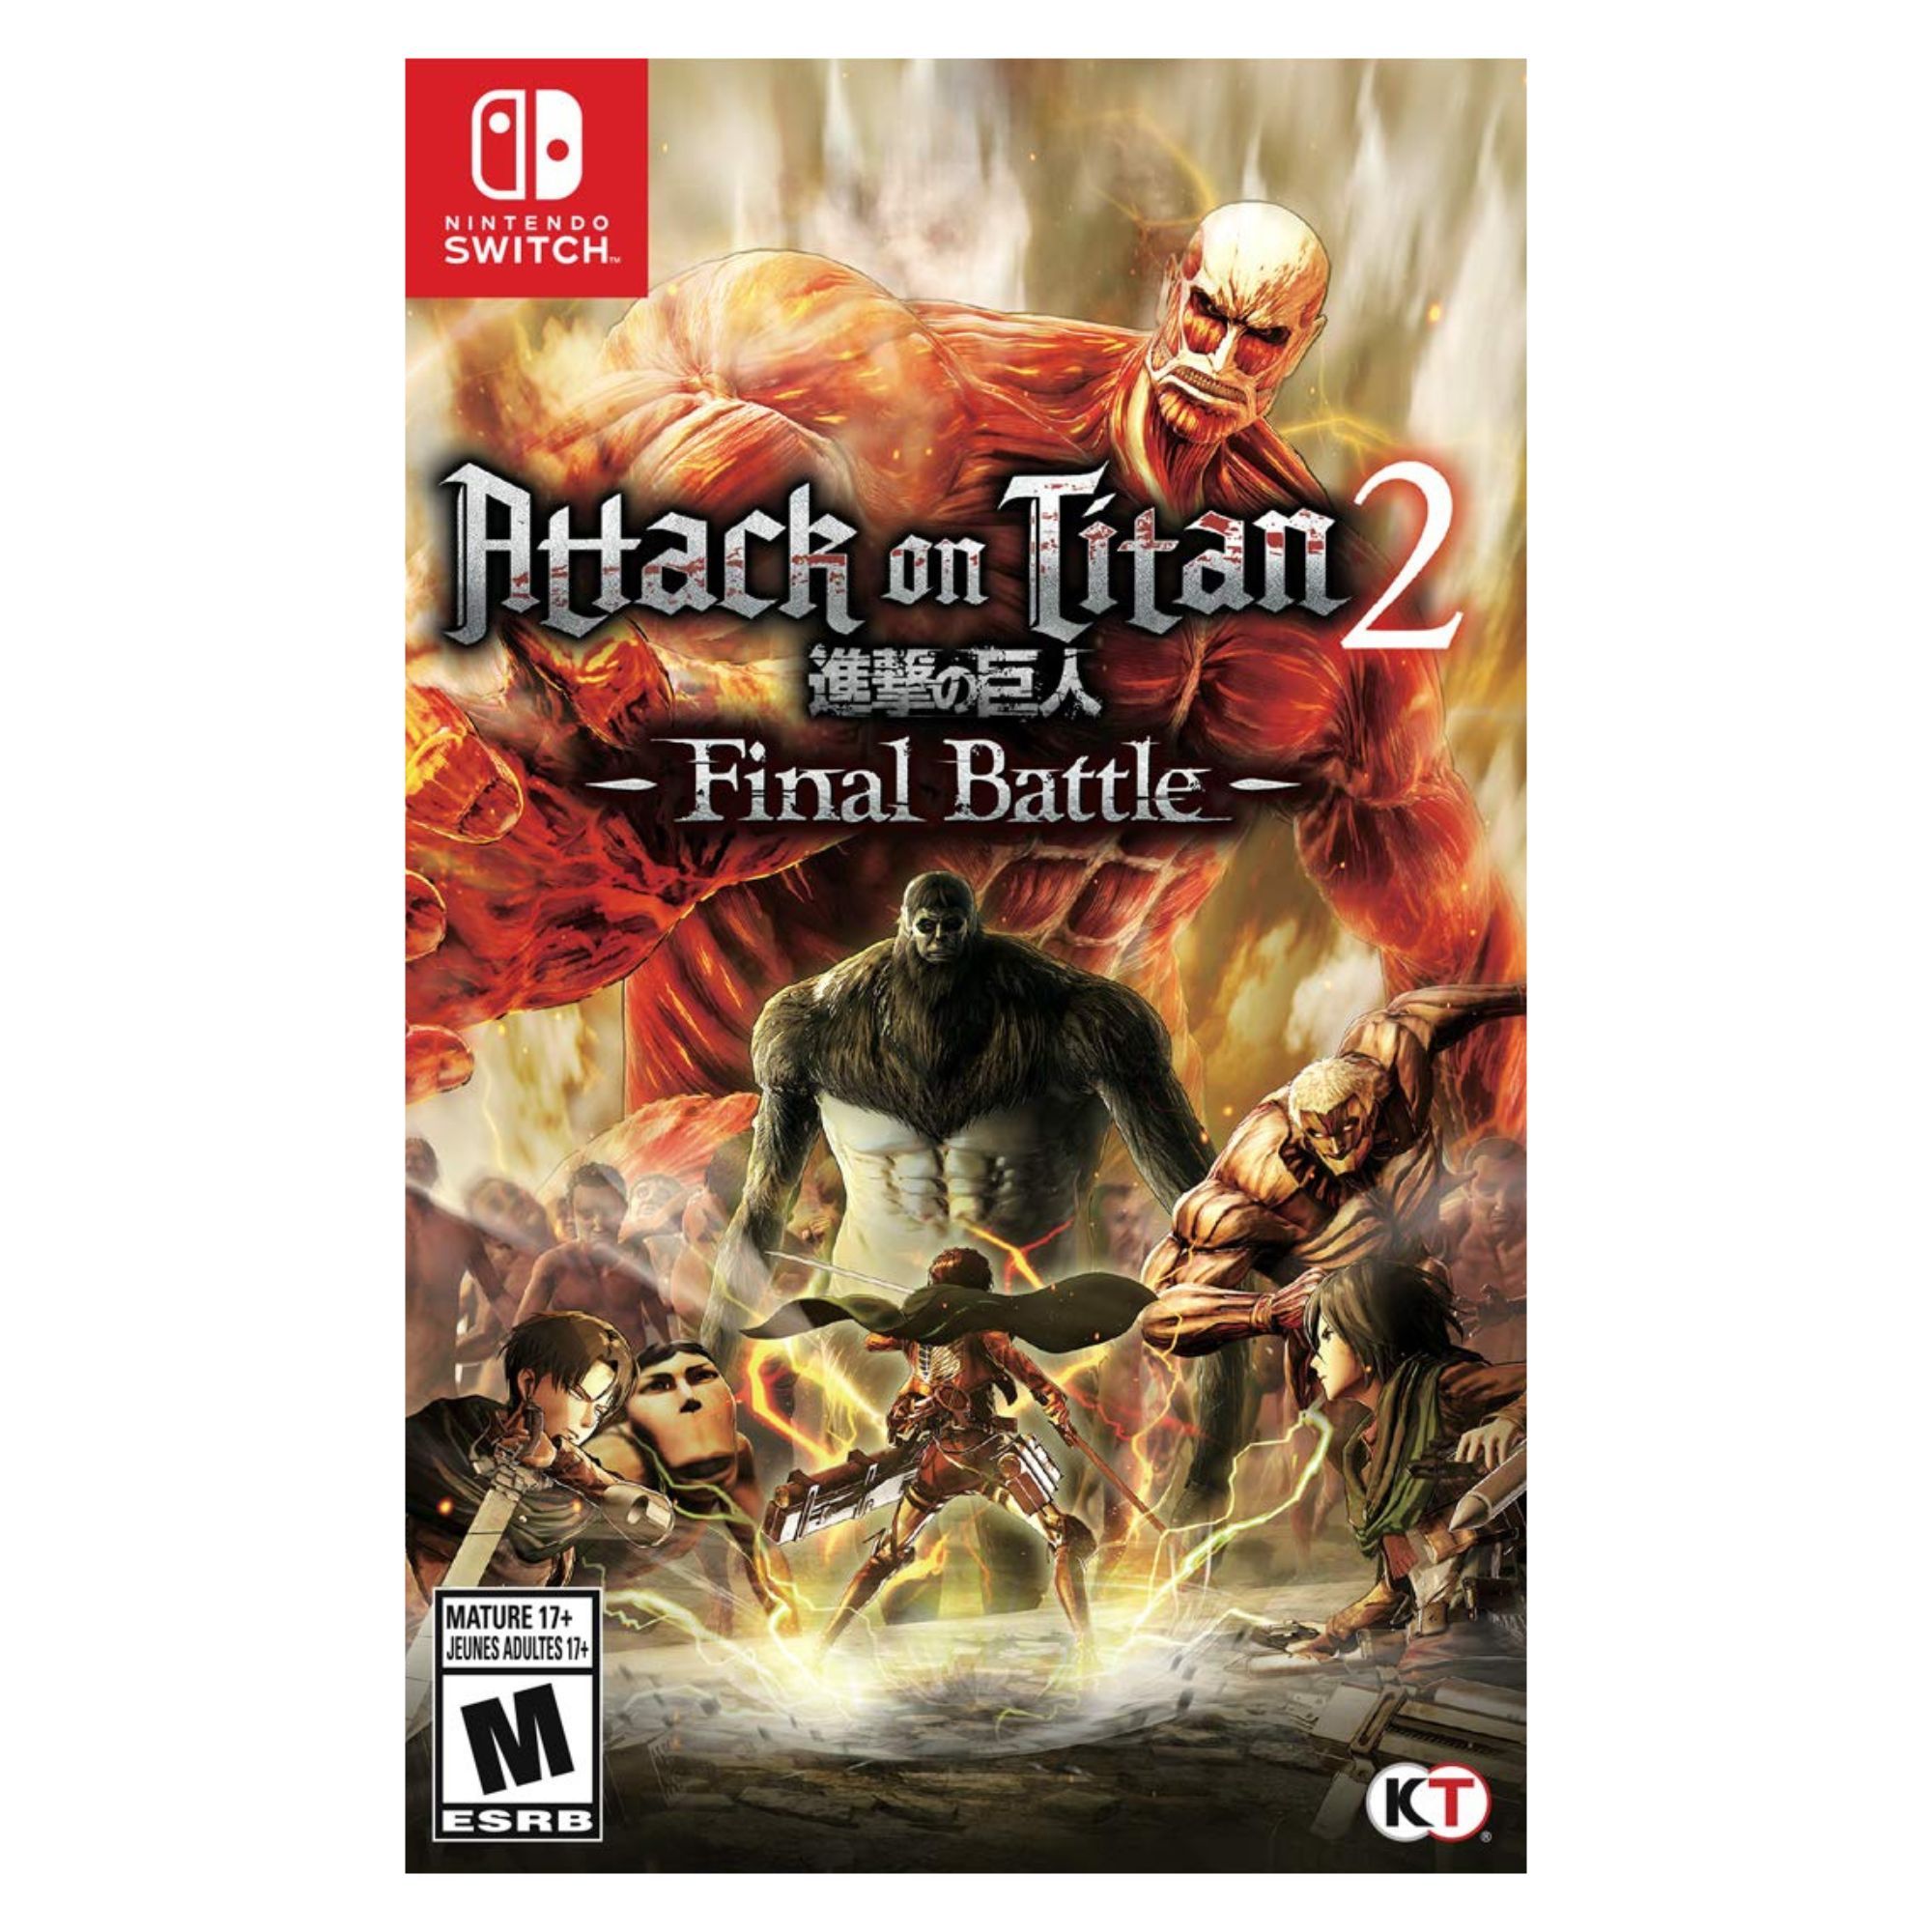 Product still of Attack on Titan 2: Final Battle for Nintendo Switch on a white background